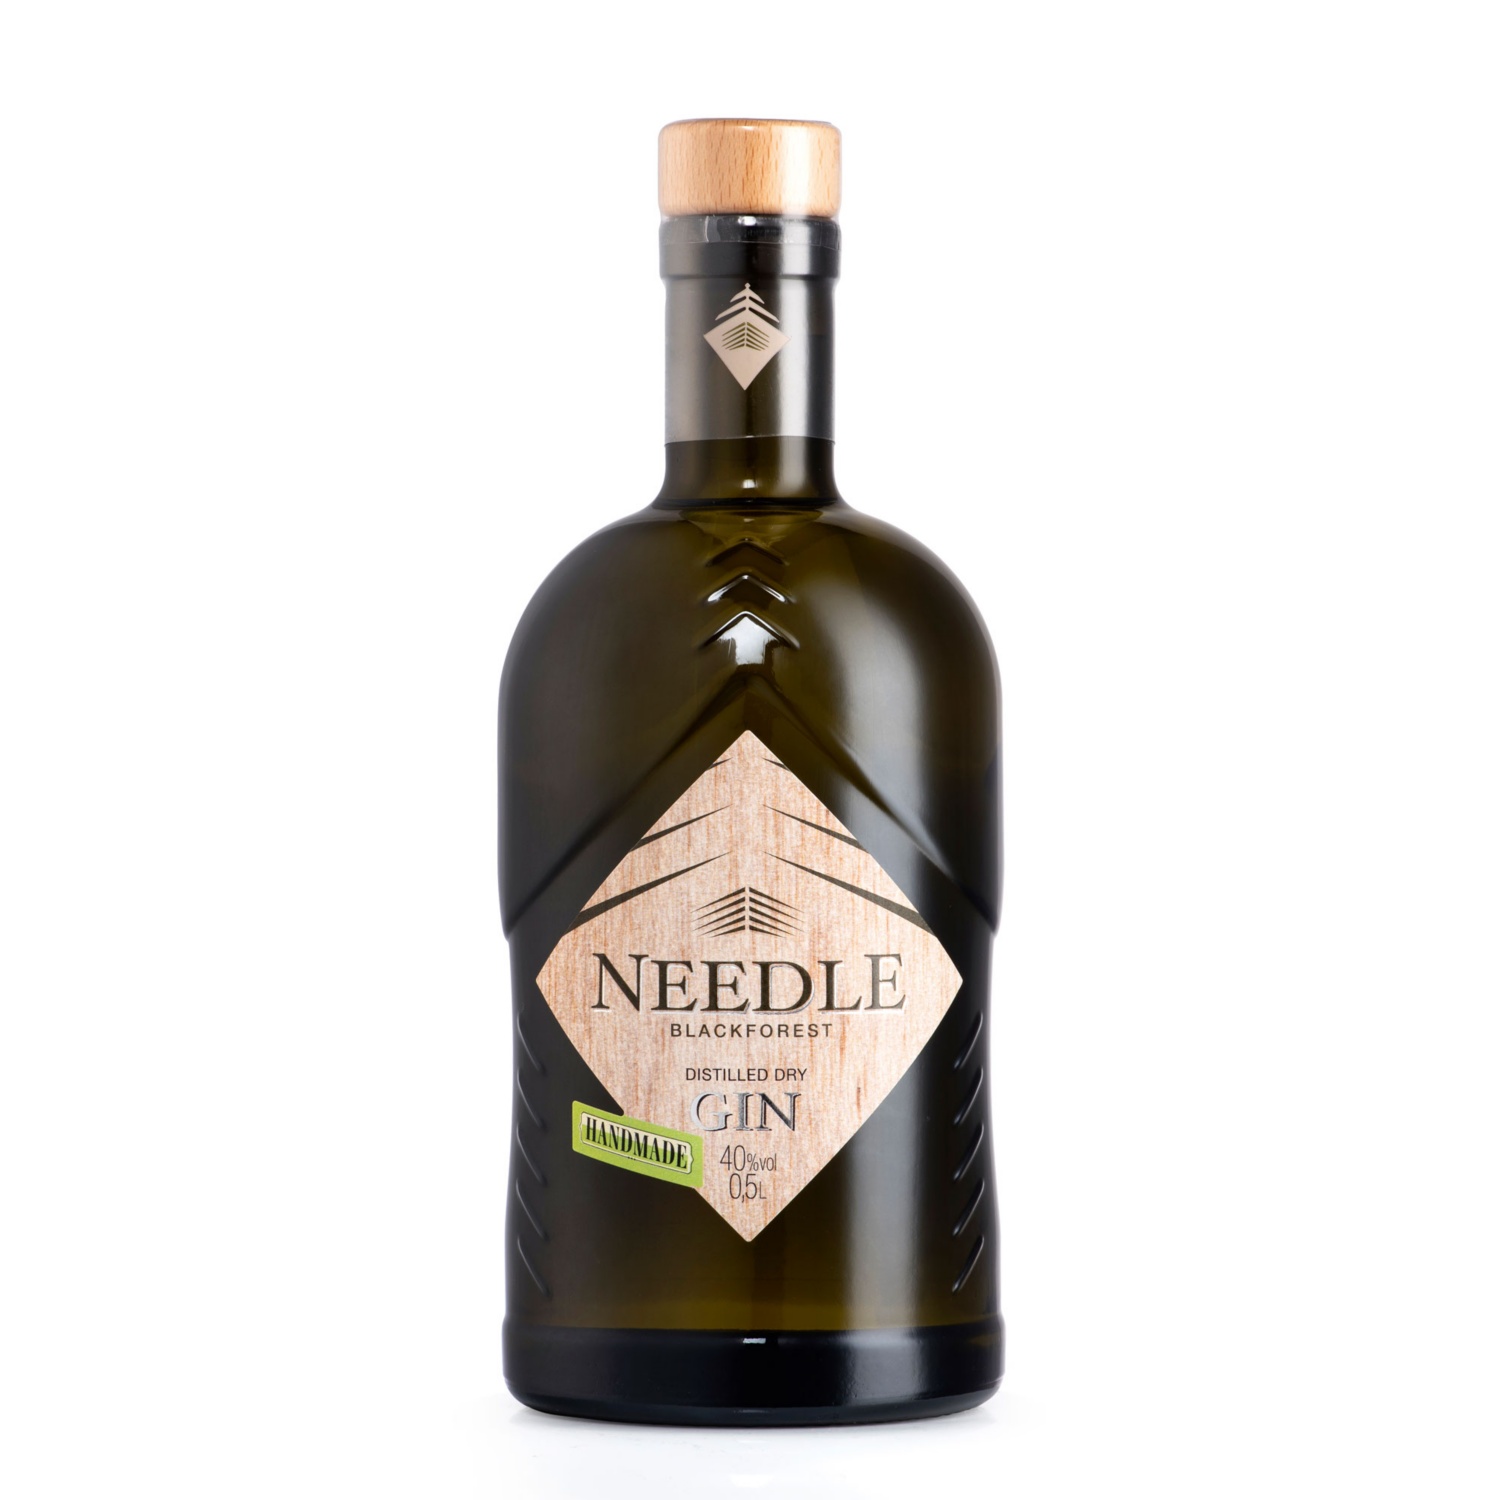 The Needle Gin